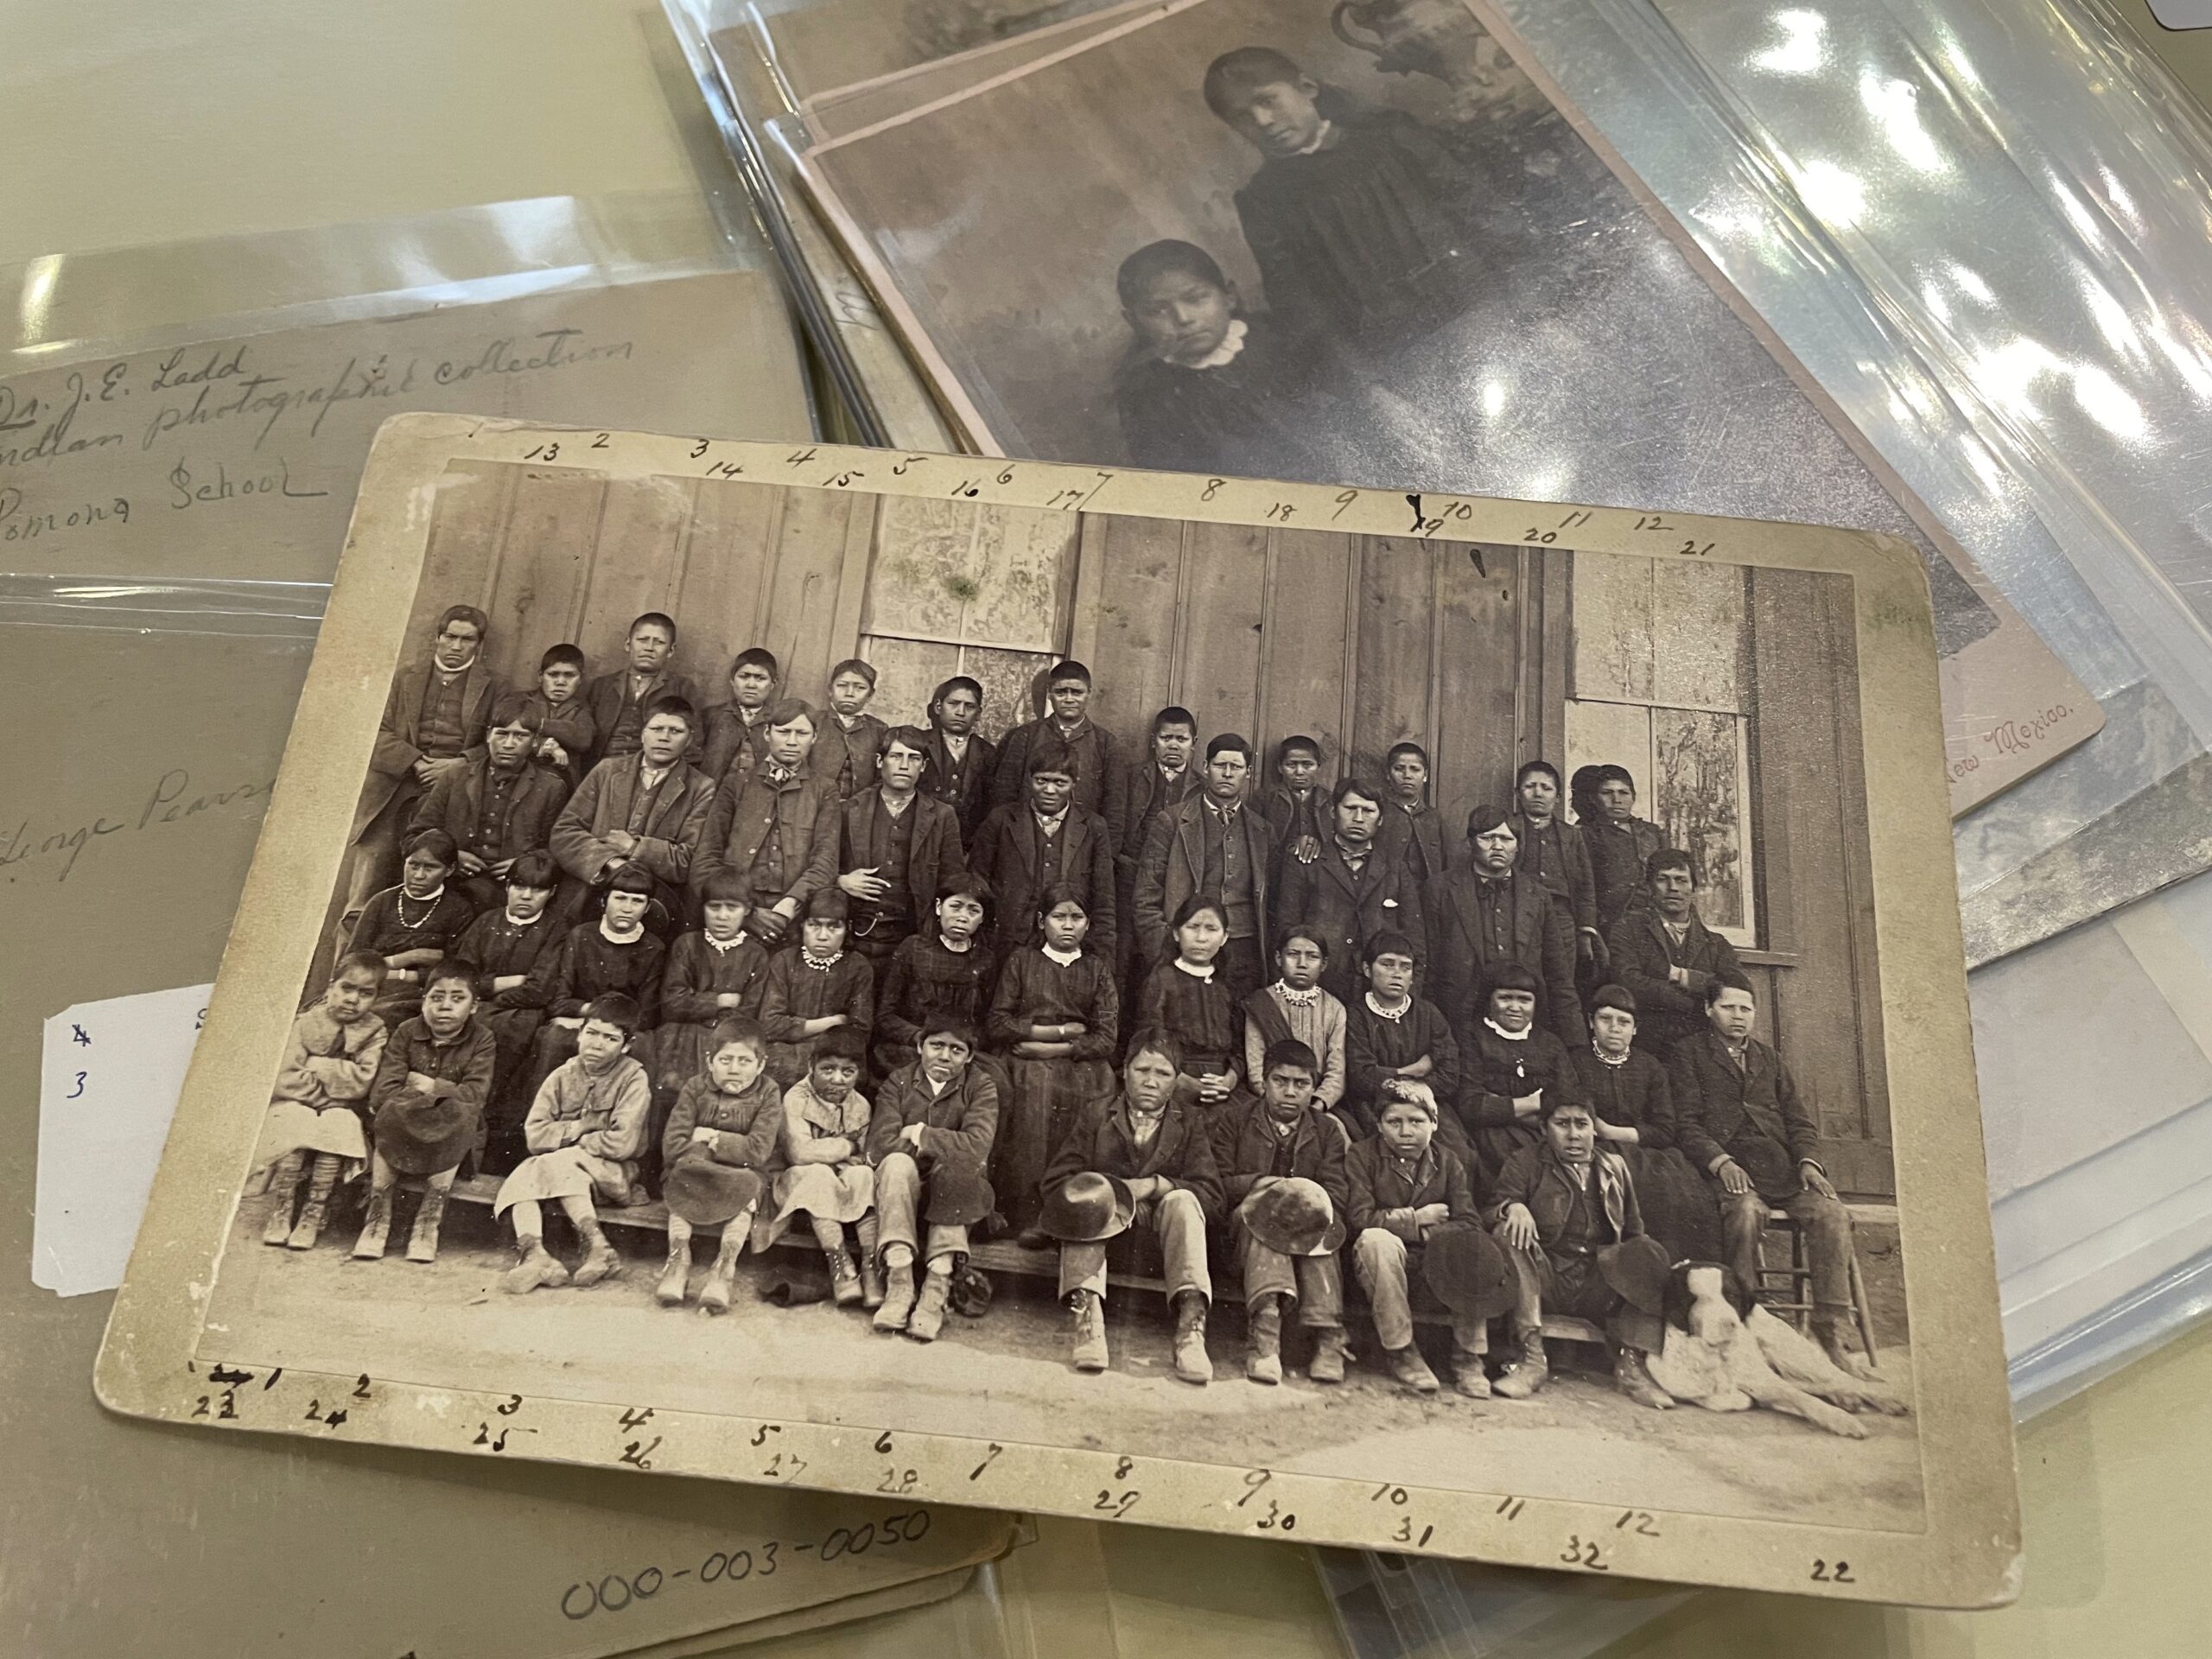 This July 8, 2021 image of a photograph archived at the Center for Southwest Research at the University of New Mexico in Albuquerque, New Mexico, shows a group of Indigenous students who attended the Ramona Industrial School in Santa Fe. The late 19th century image is among many in the Horatio Oliver Ladd Photograph Collection that are related to the boarding school. (AP Photo/Susan Montoya Bryan)